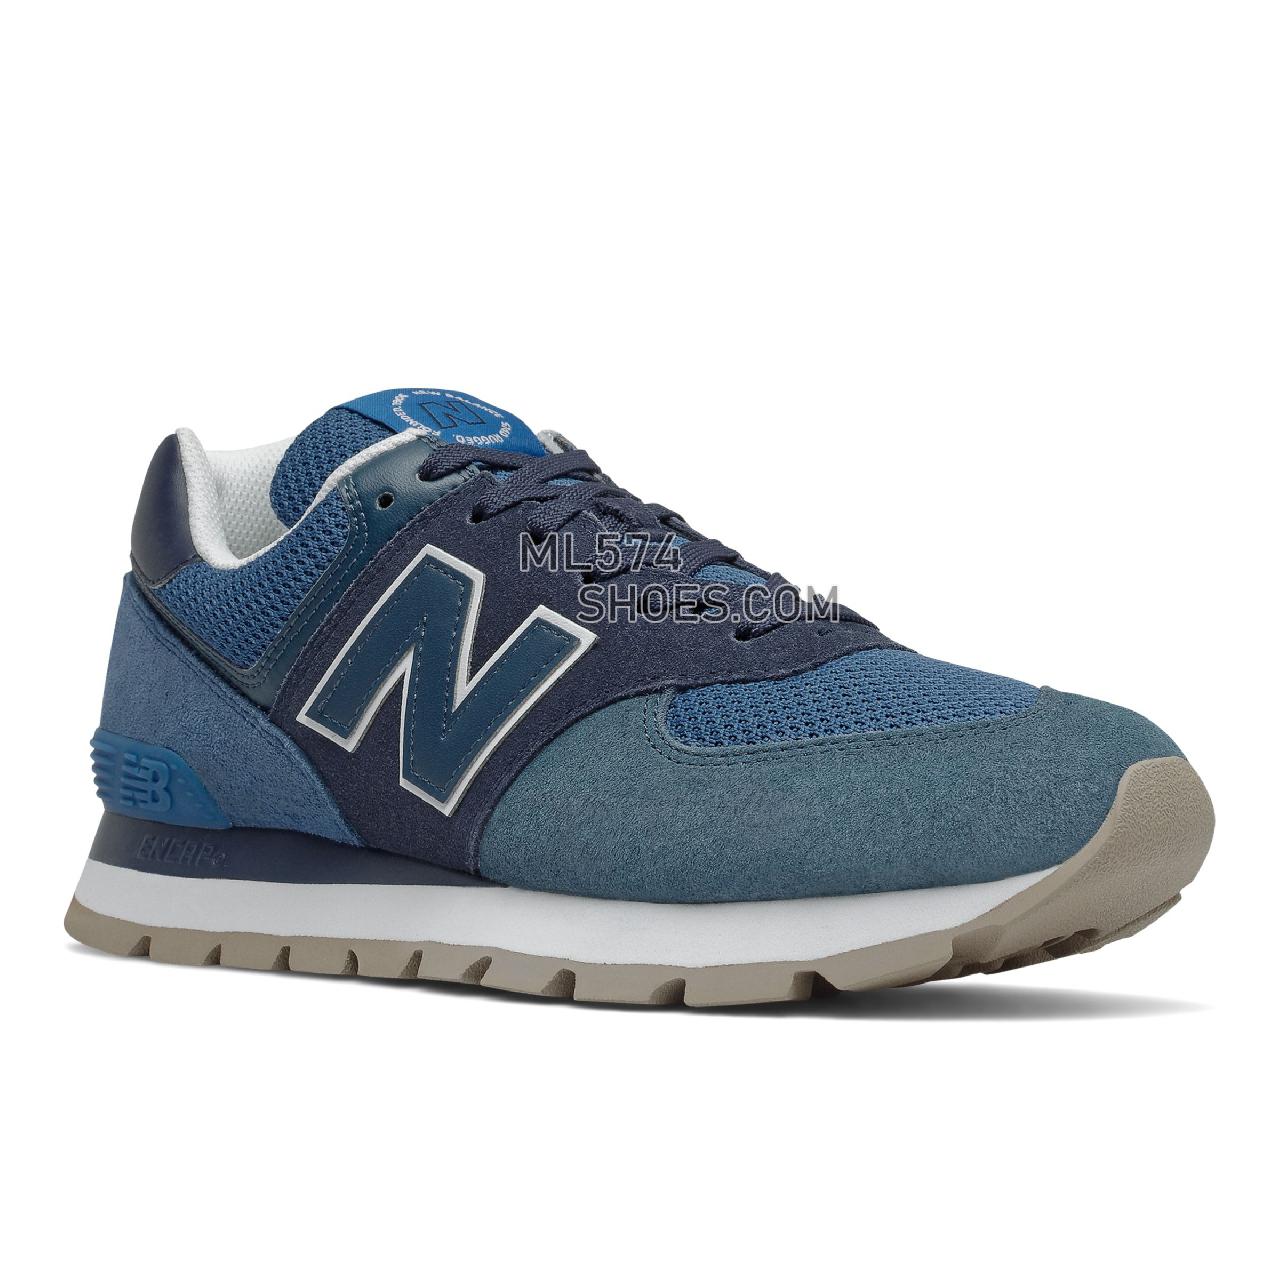 New Balance 574 Rugged - Men's Classic Sneakers - Natural Indigo with Laser Blue - ML574DCL